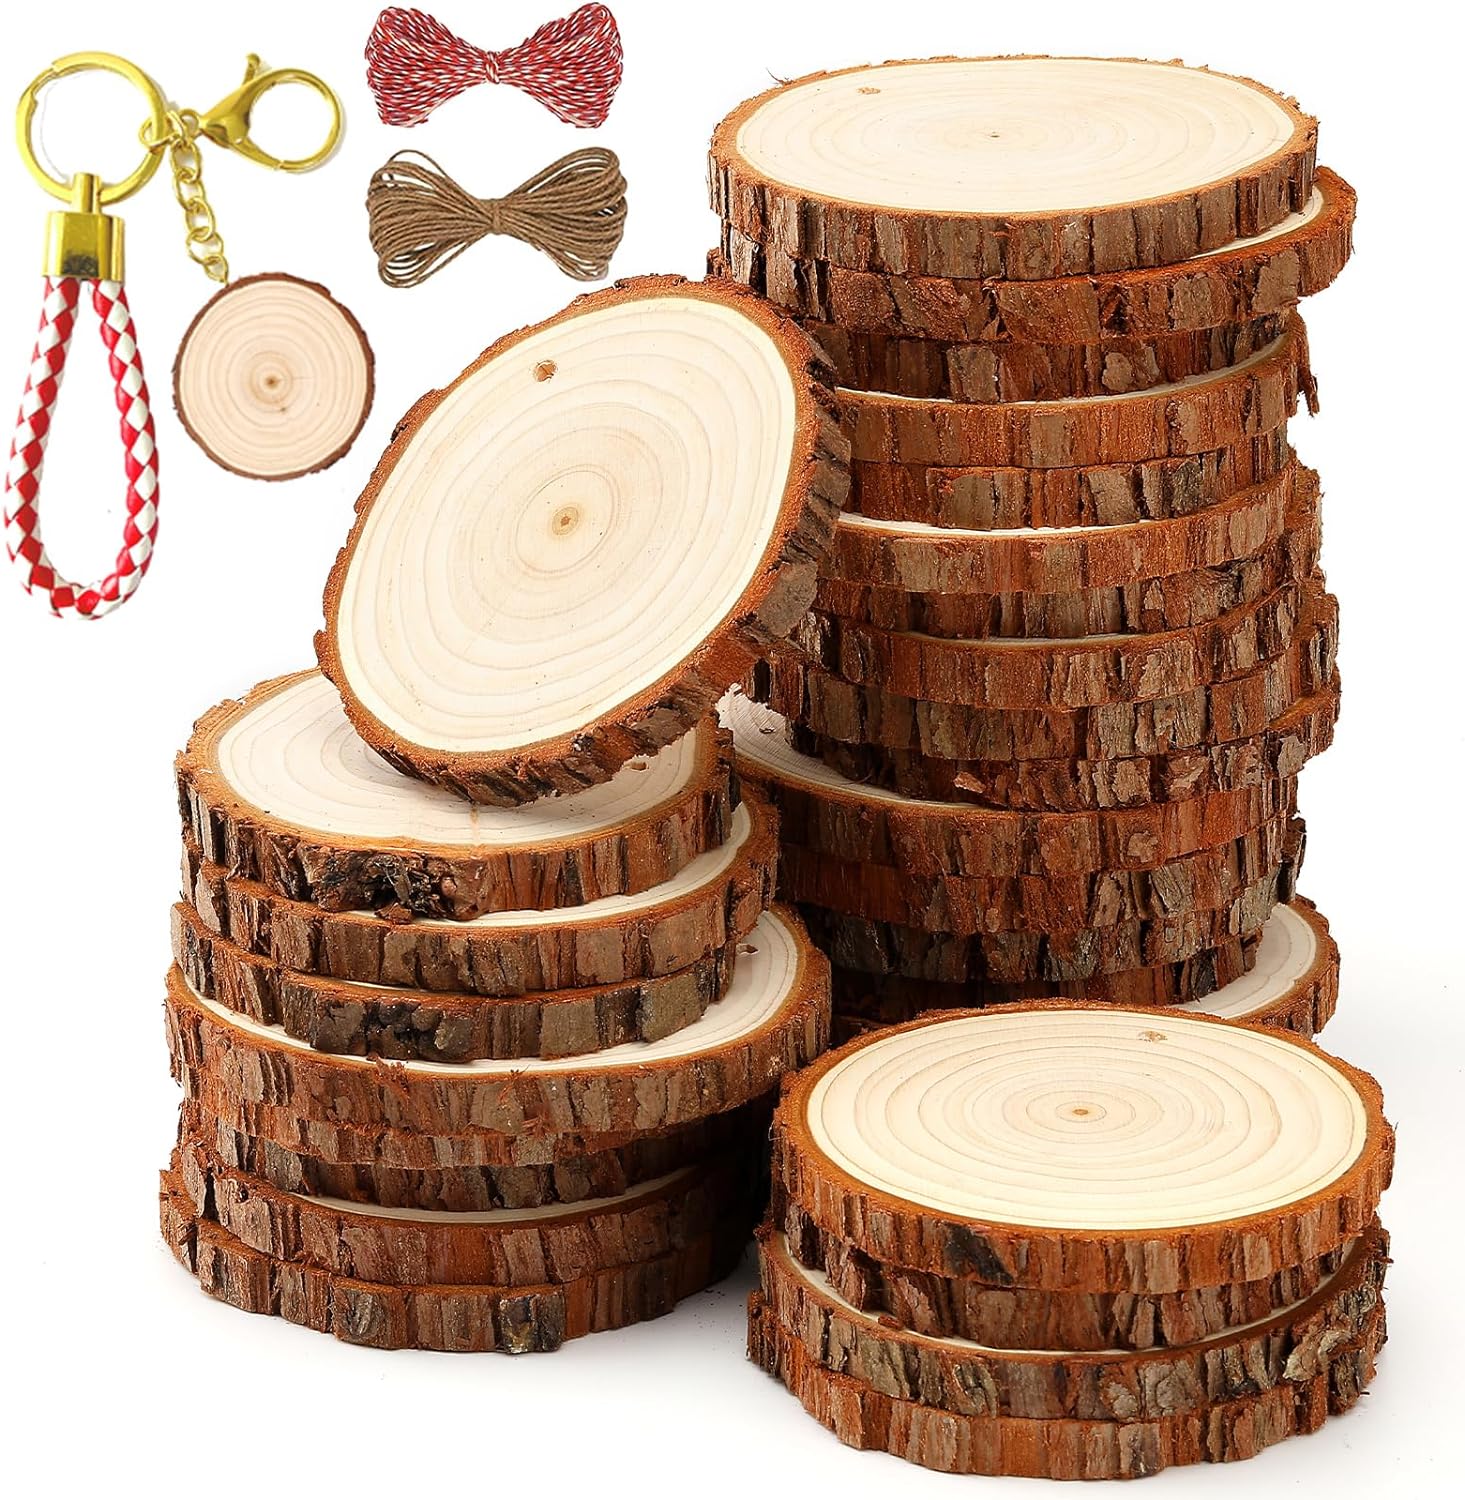 3/4 Wood Discs Wood Circles Set of 25 Unfinished Wood Coins 1/8 Thick Wood  Rounds Wooden Circles 